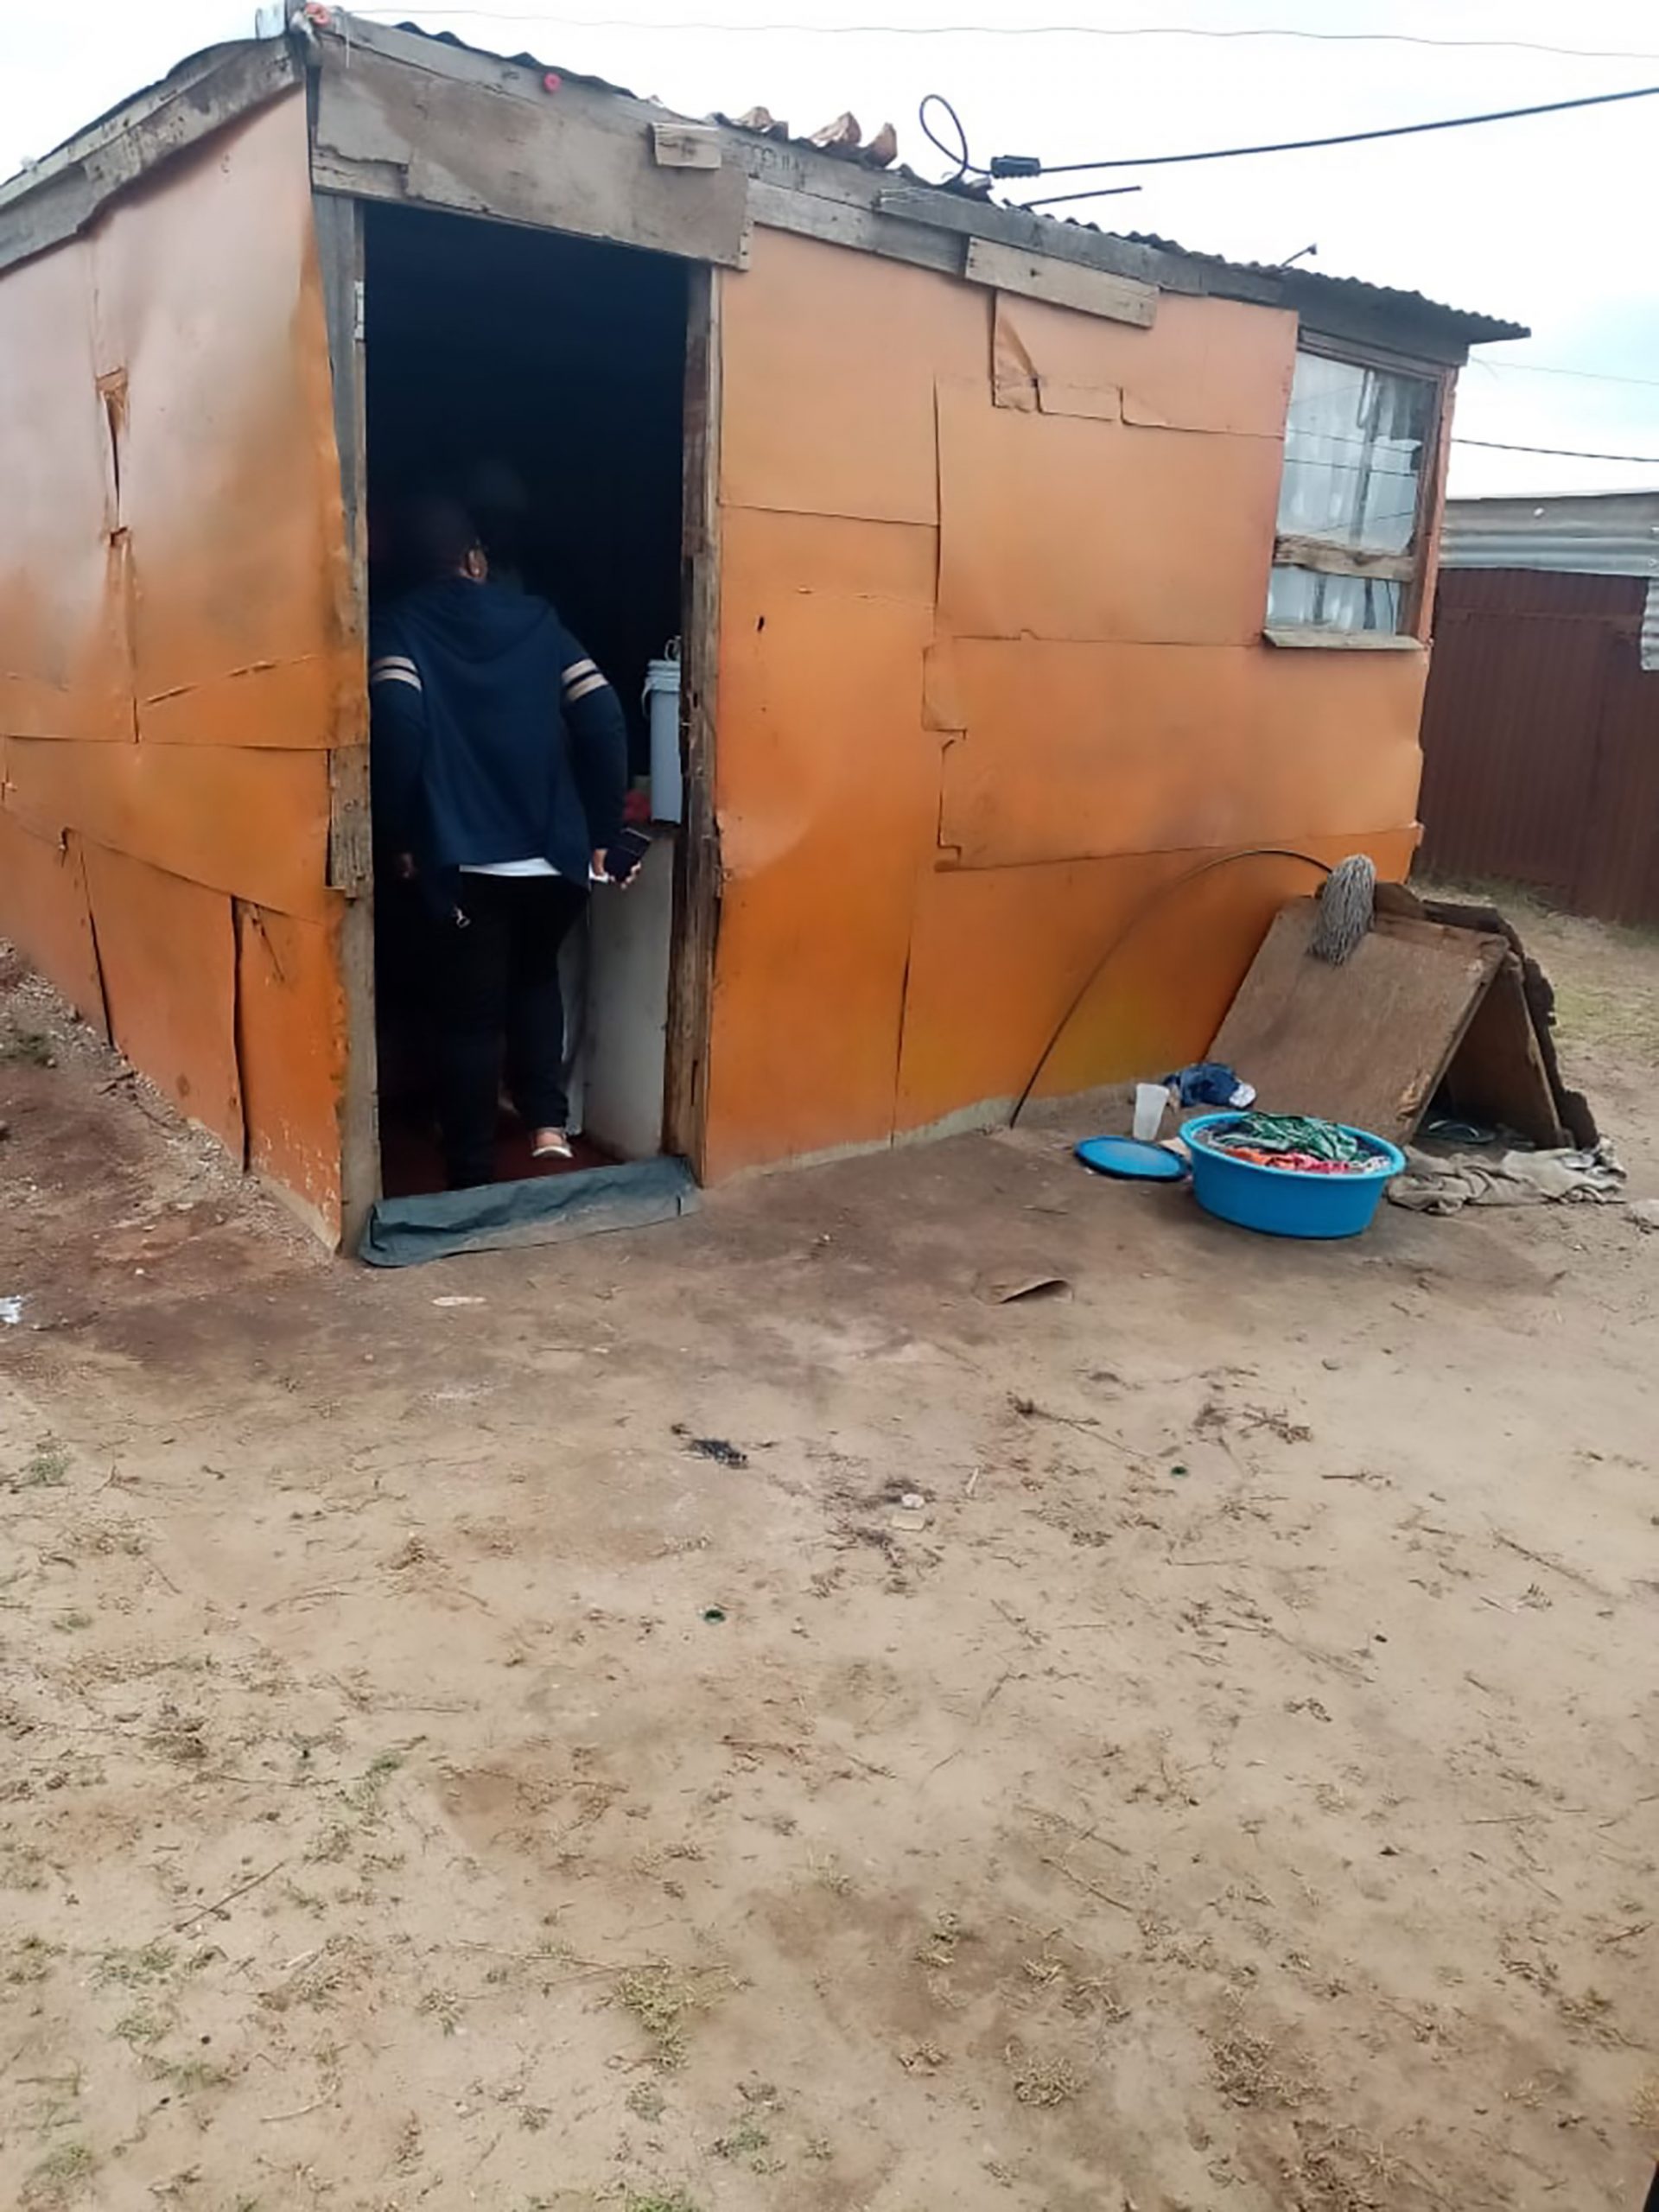 Read more about the article 79yo With 1-Room Shack Given New 3-Bed House By Cops